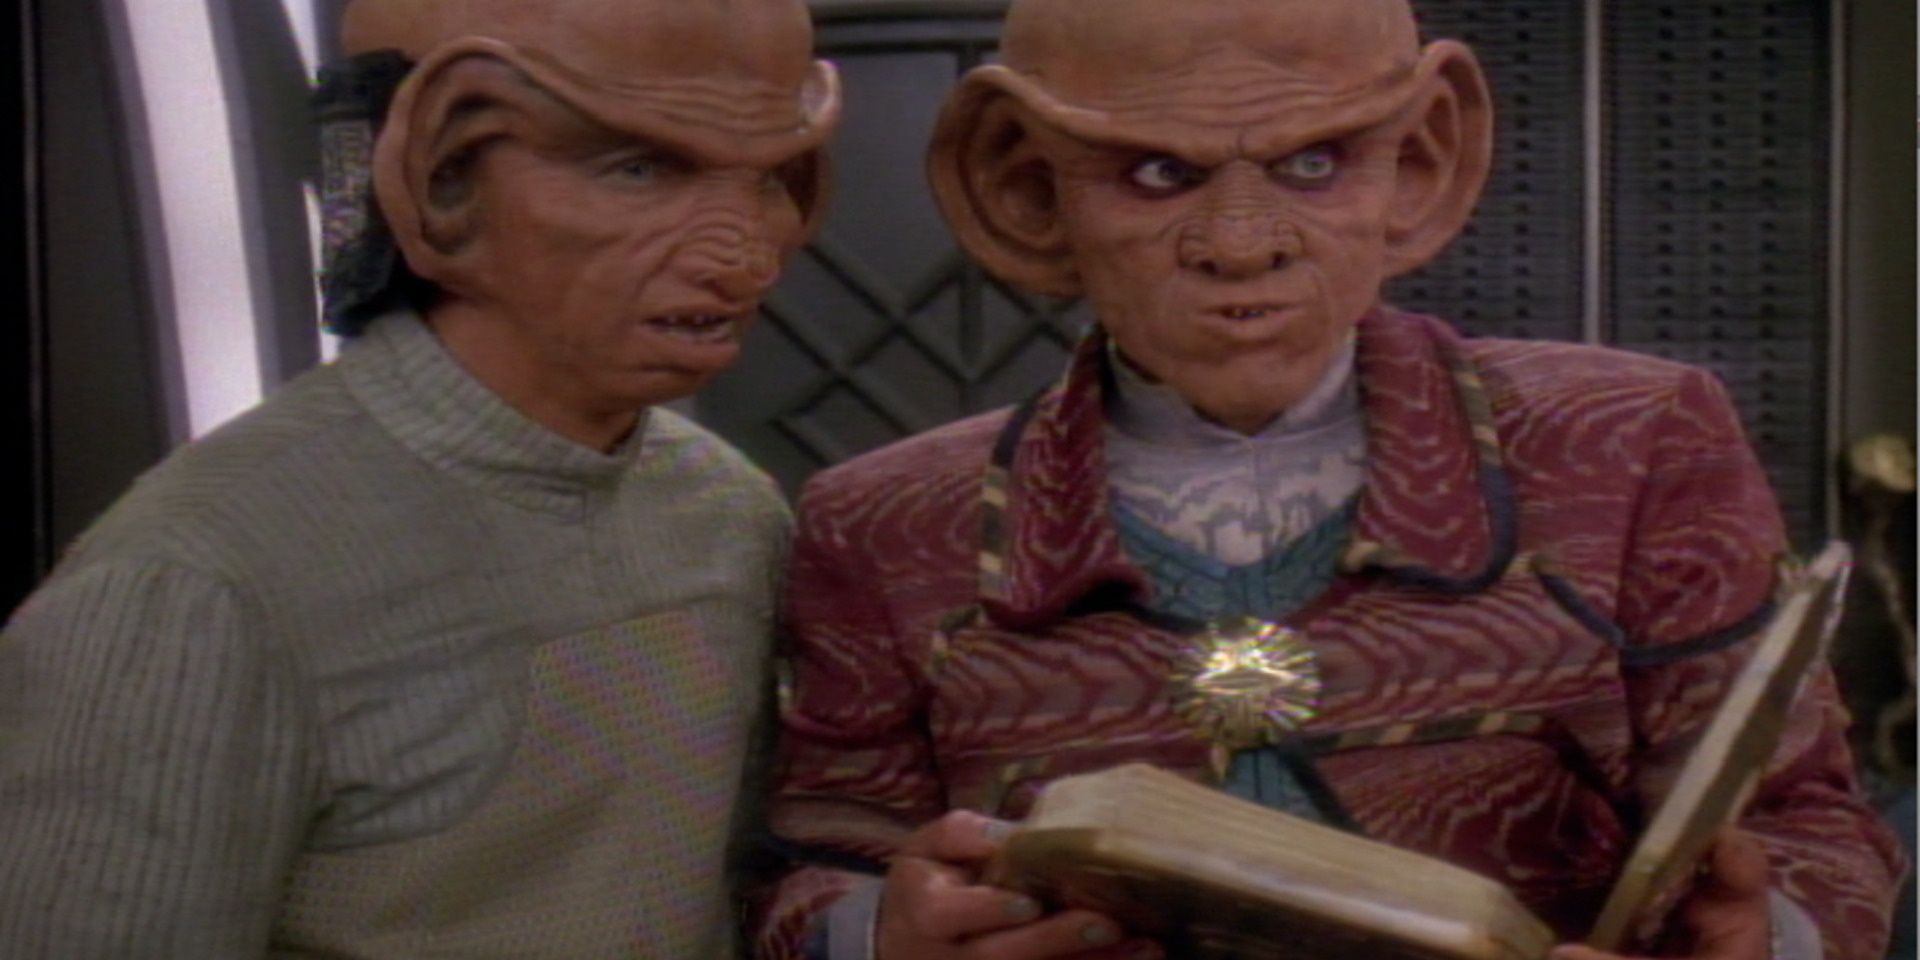 Rom (Max Grodénchik) (left) and Quark (Armin Shimerman) reading from the revised Rules of Acquisition. Image Source: ParamountPlus.com